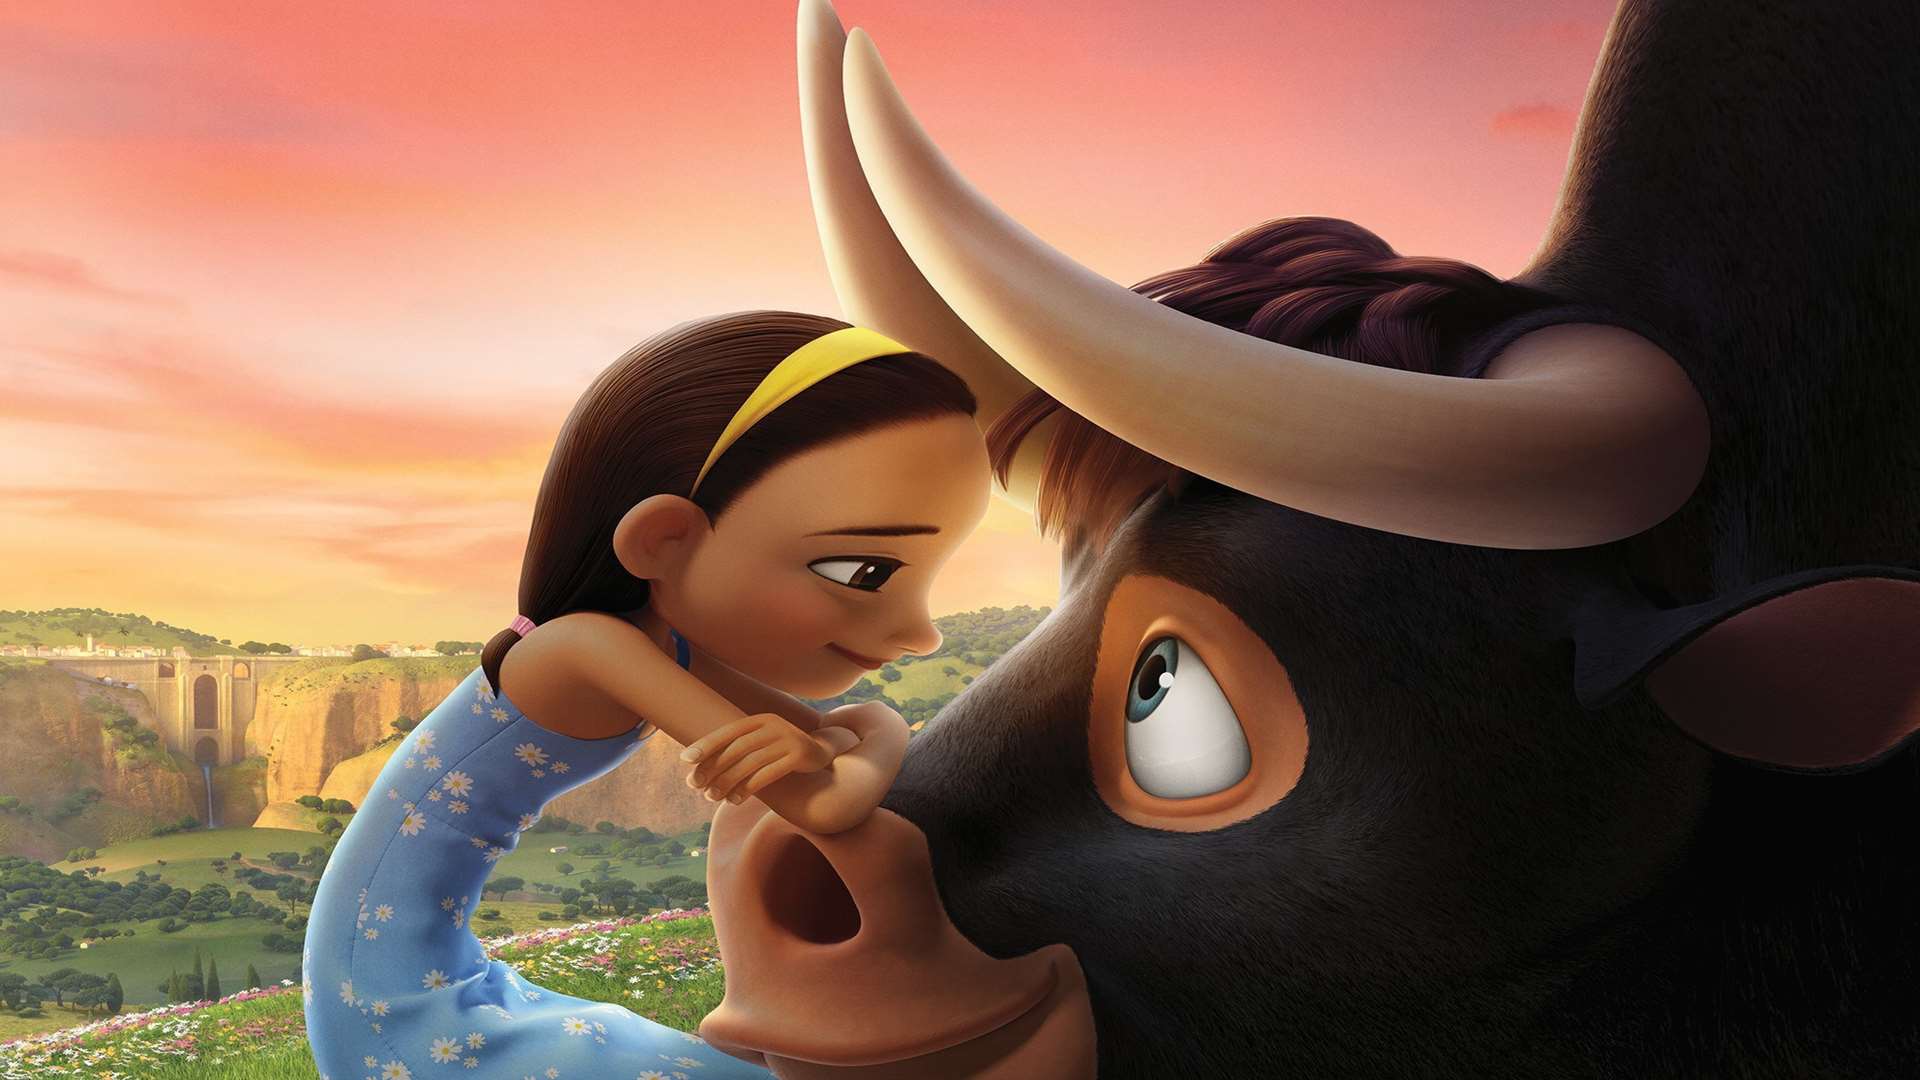 There may still be time to catch Ferdinand in the cinema